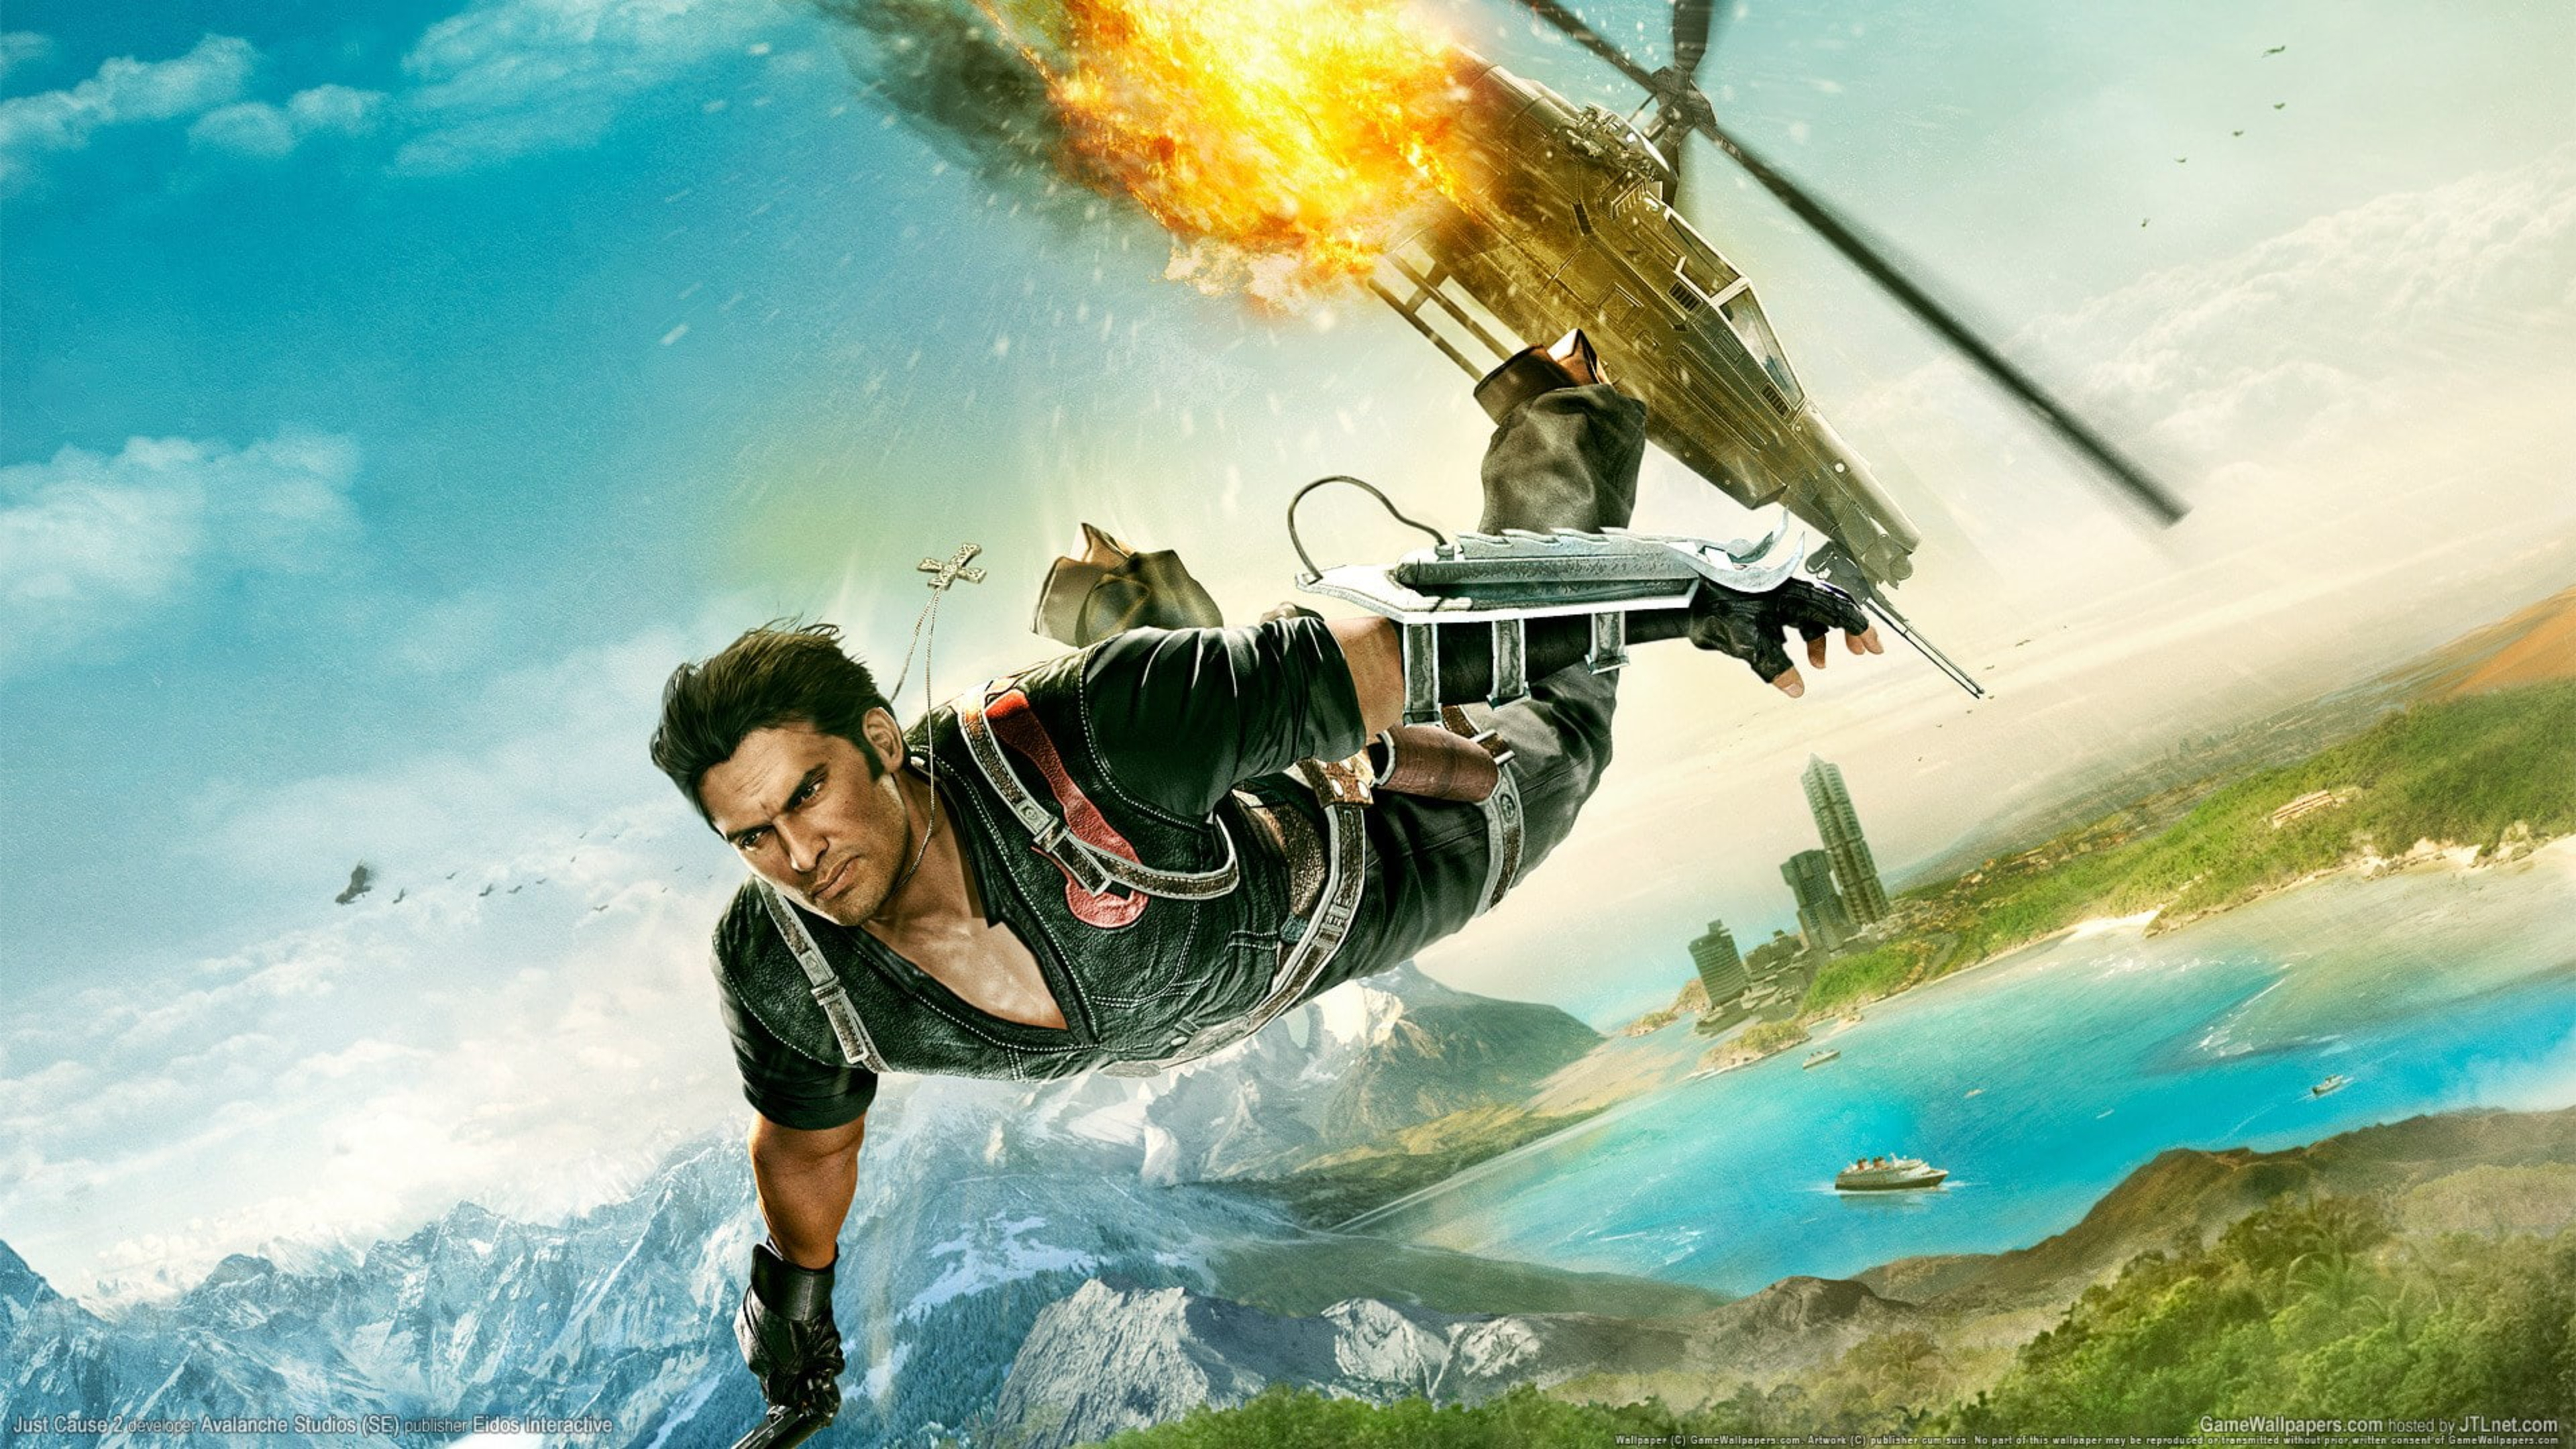 Imagens Just Cause 2 3840x2160